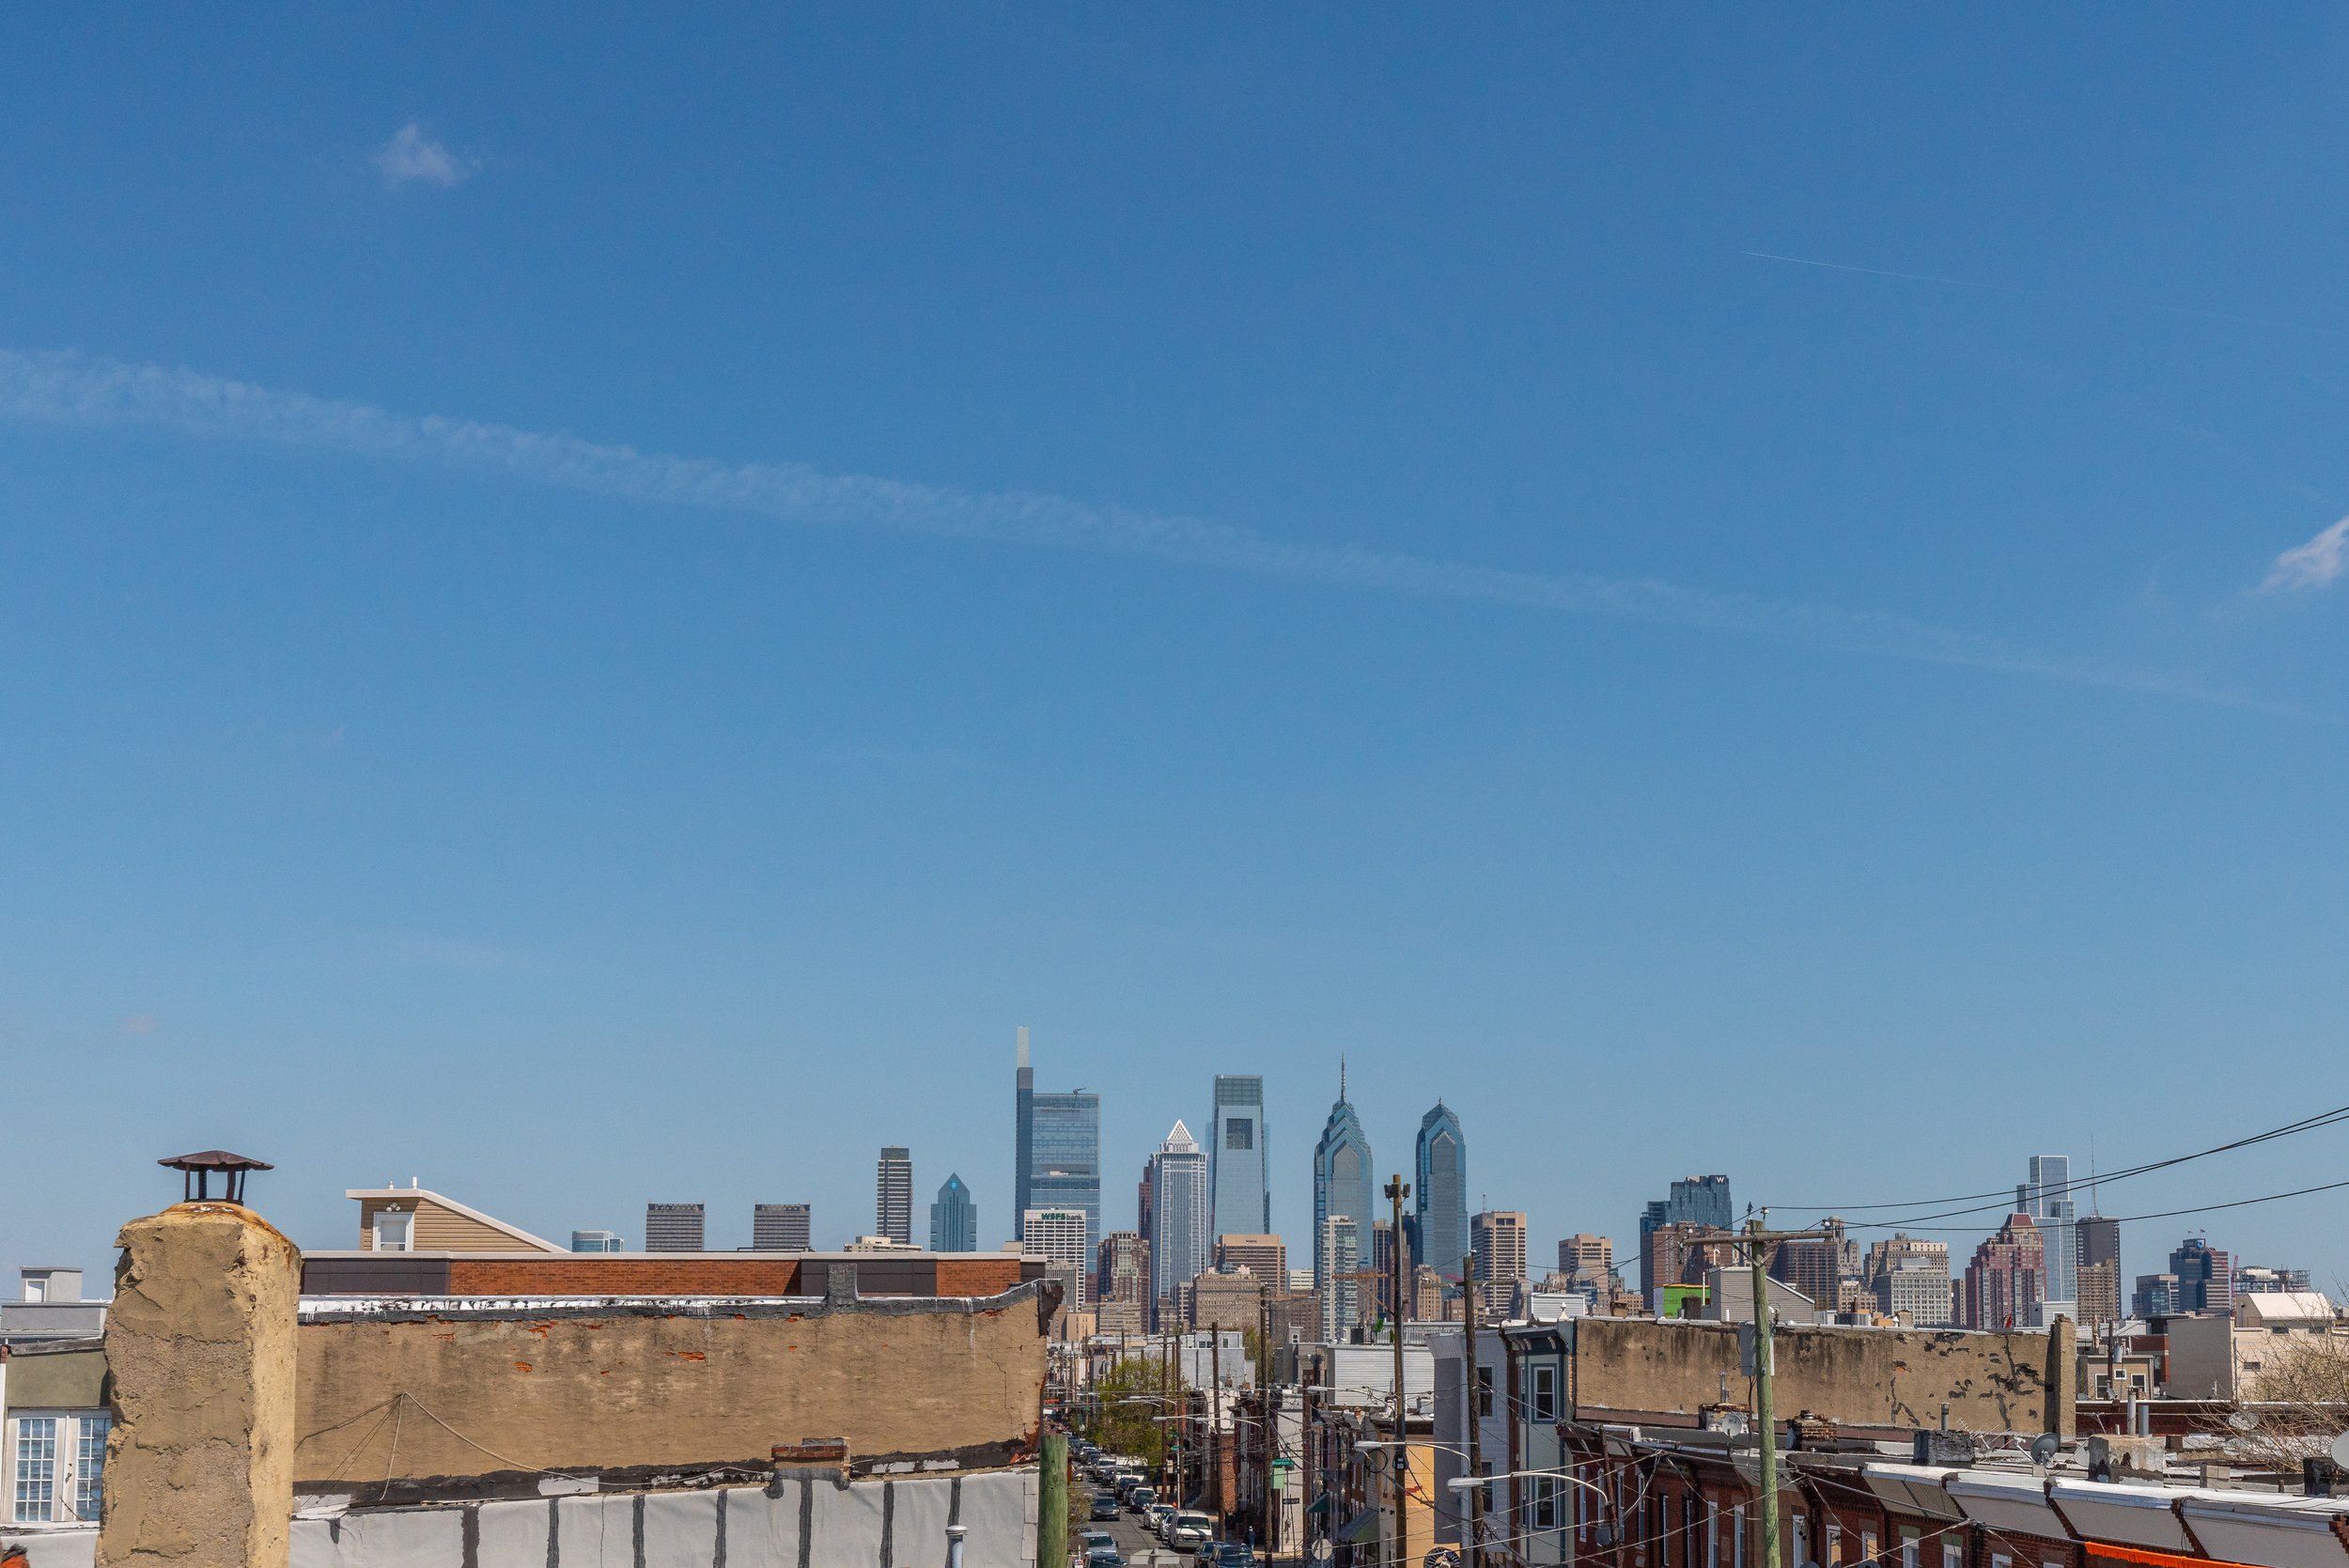 732 S 19TH ST PHOTOGRAPHY Ⓒ WEFILMPHILLY-55.jpg